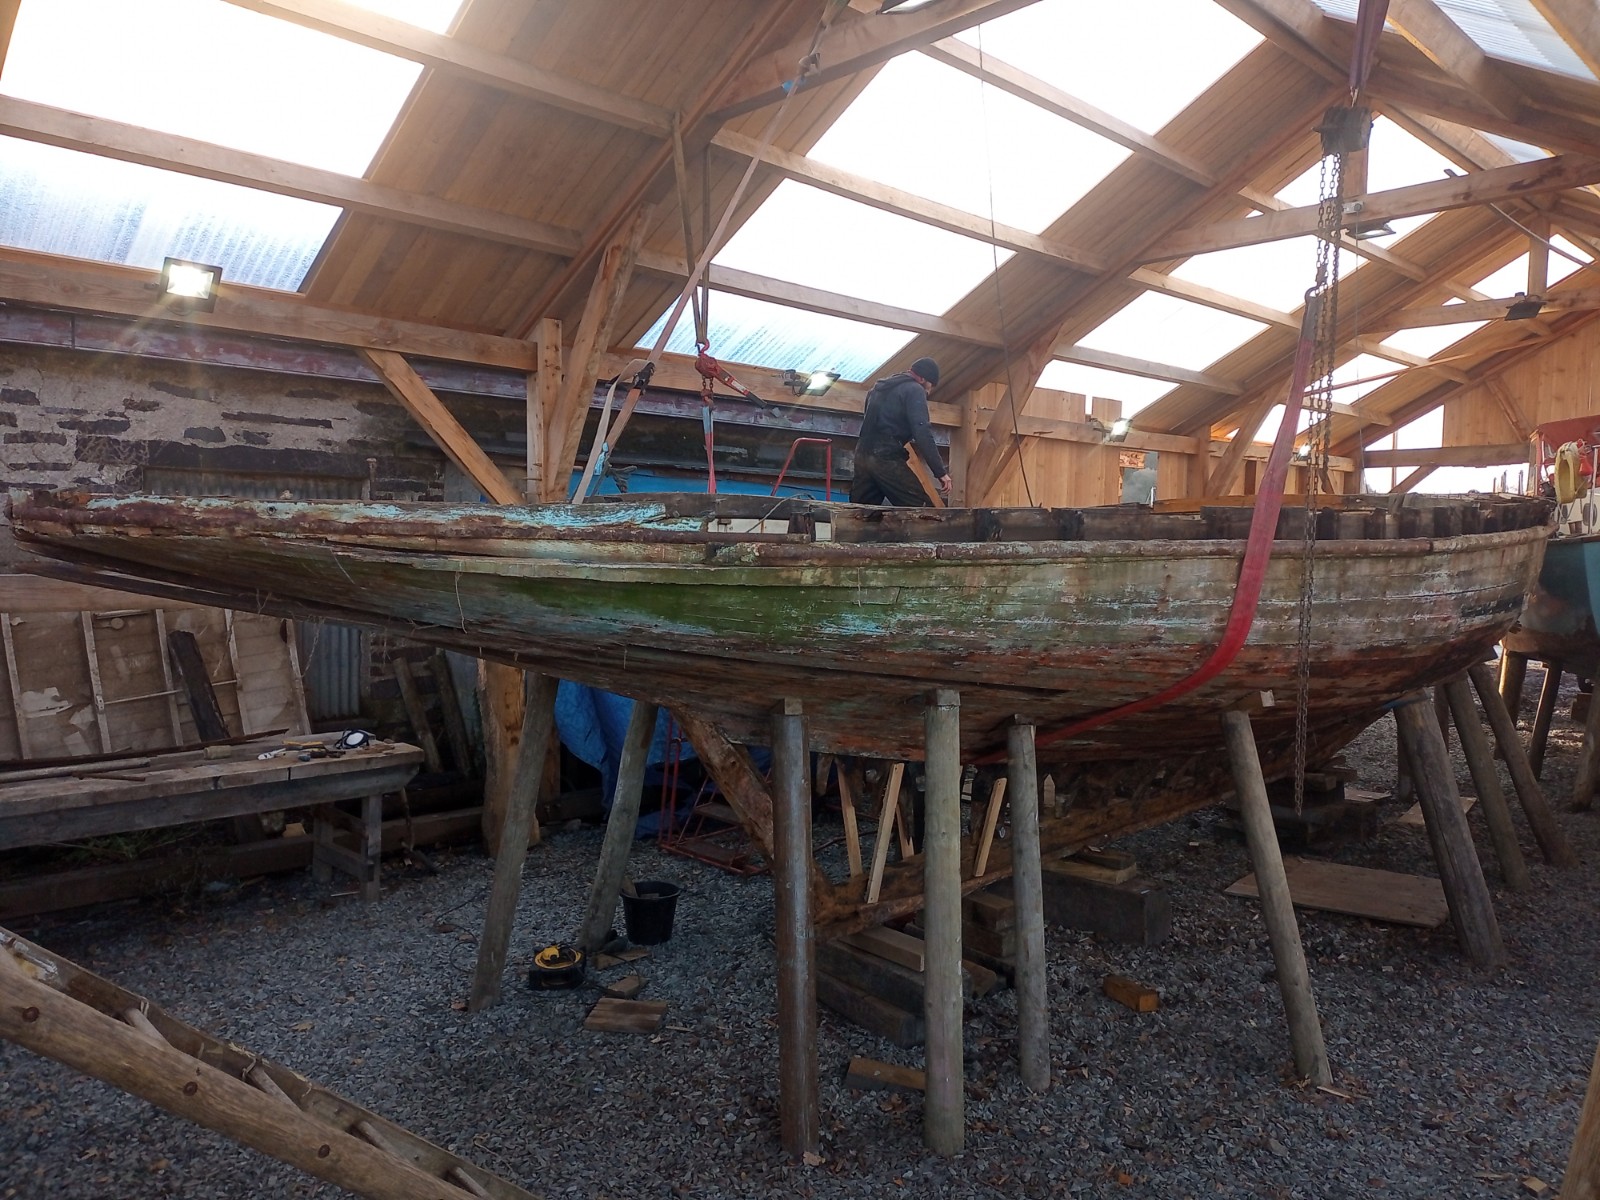 Mystery II being restored at Waterfront Marine